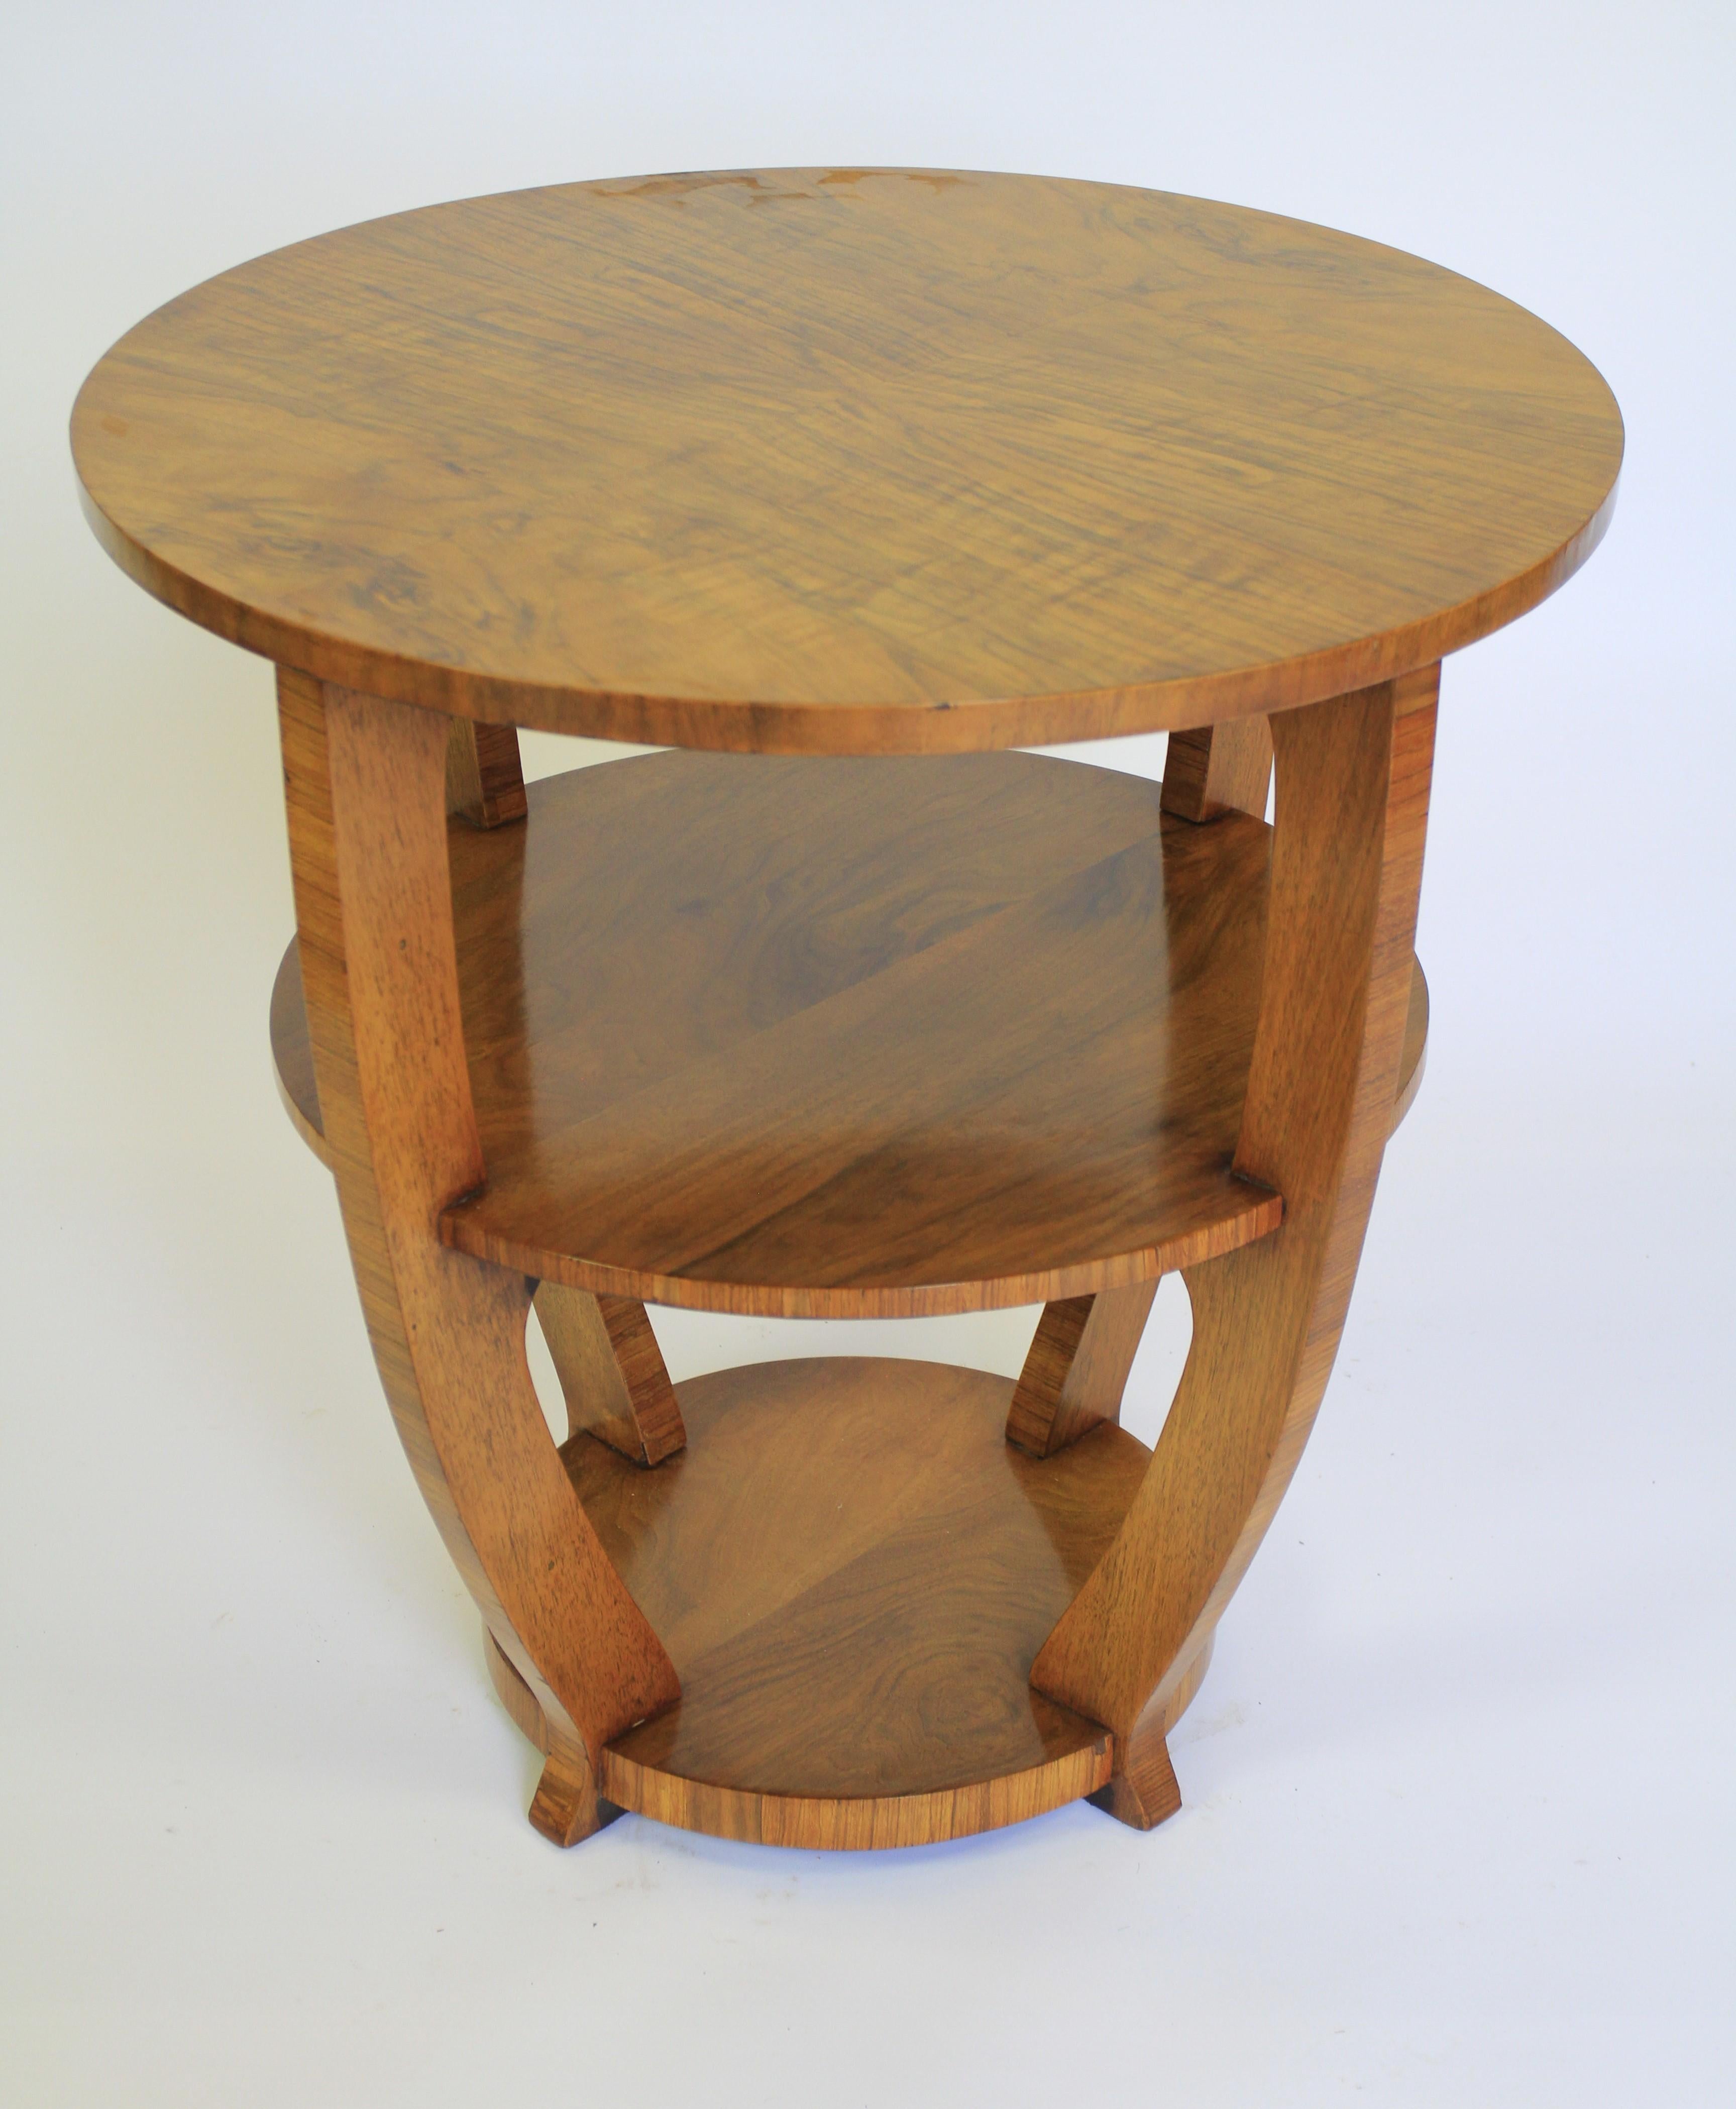 Polished Art Deco Walnut 3 Tier Lamp Table circa 1930s For Sale